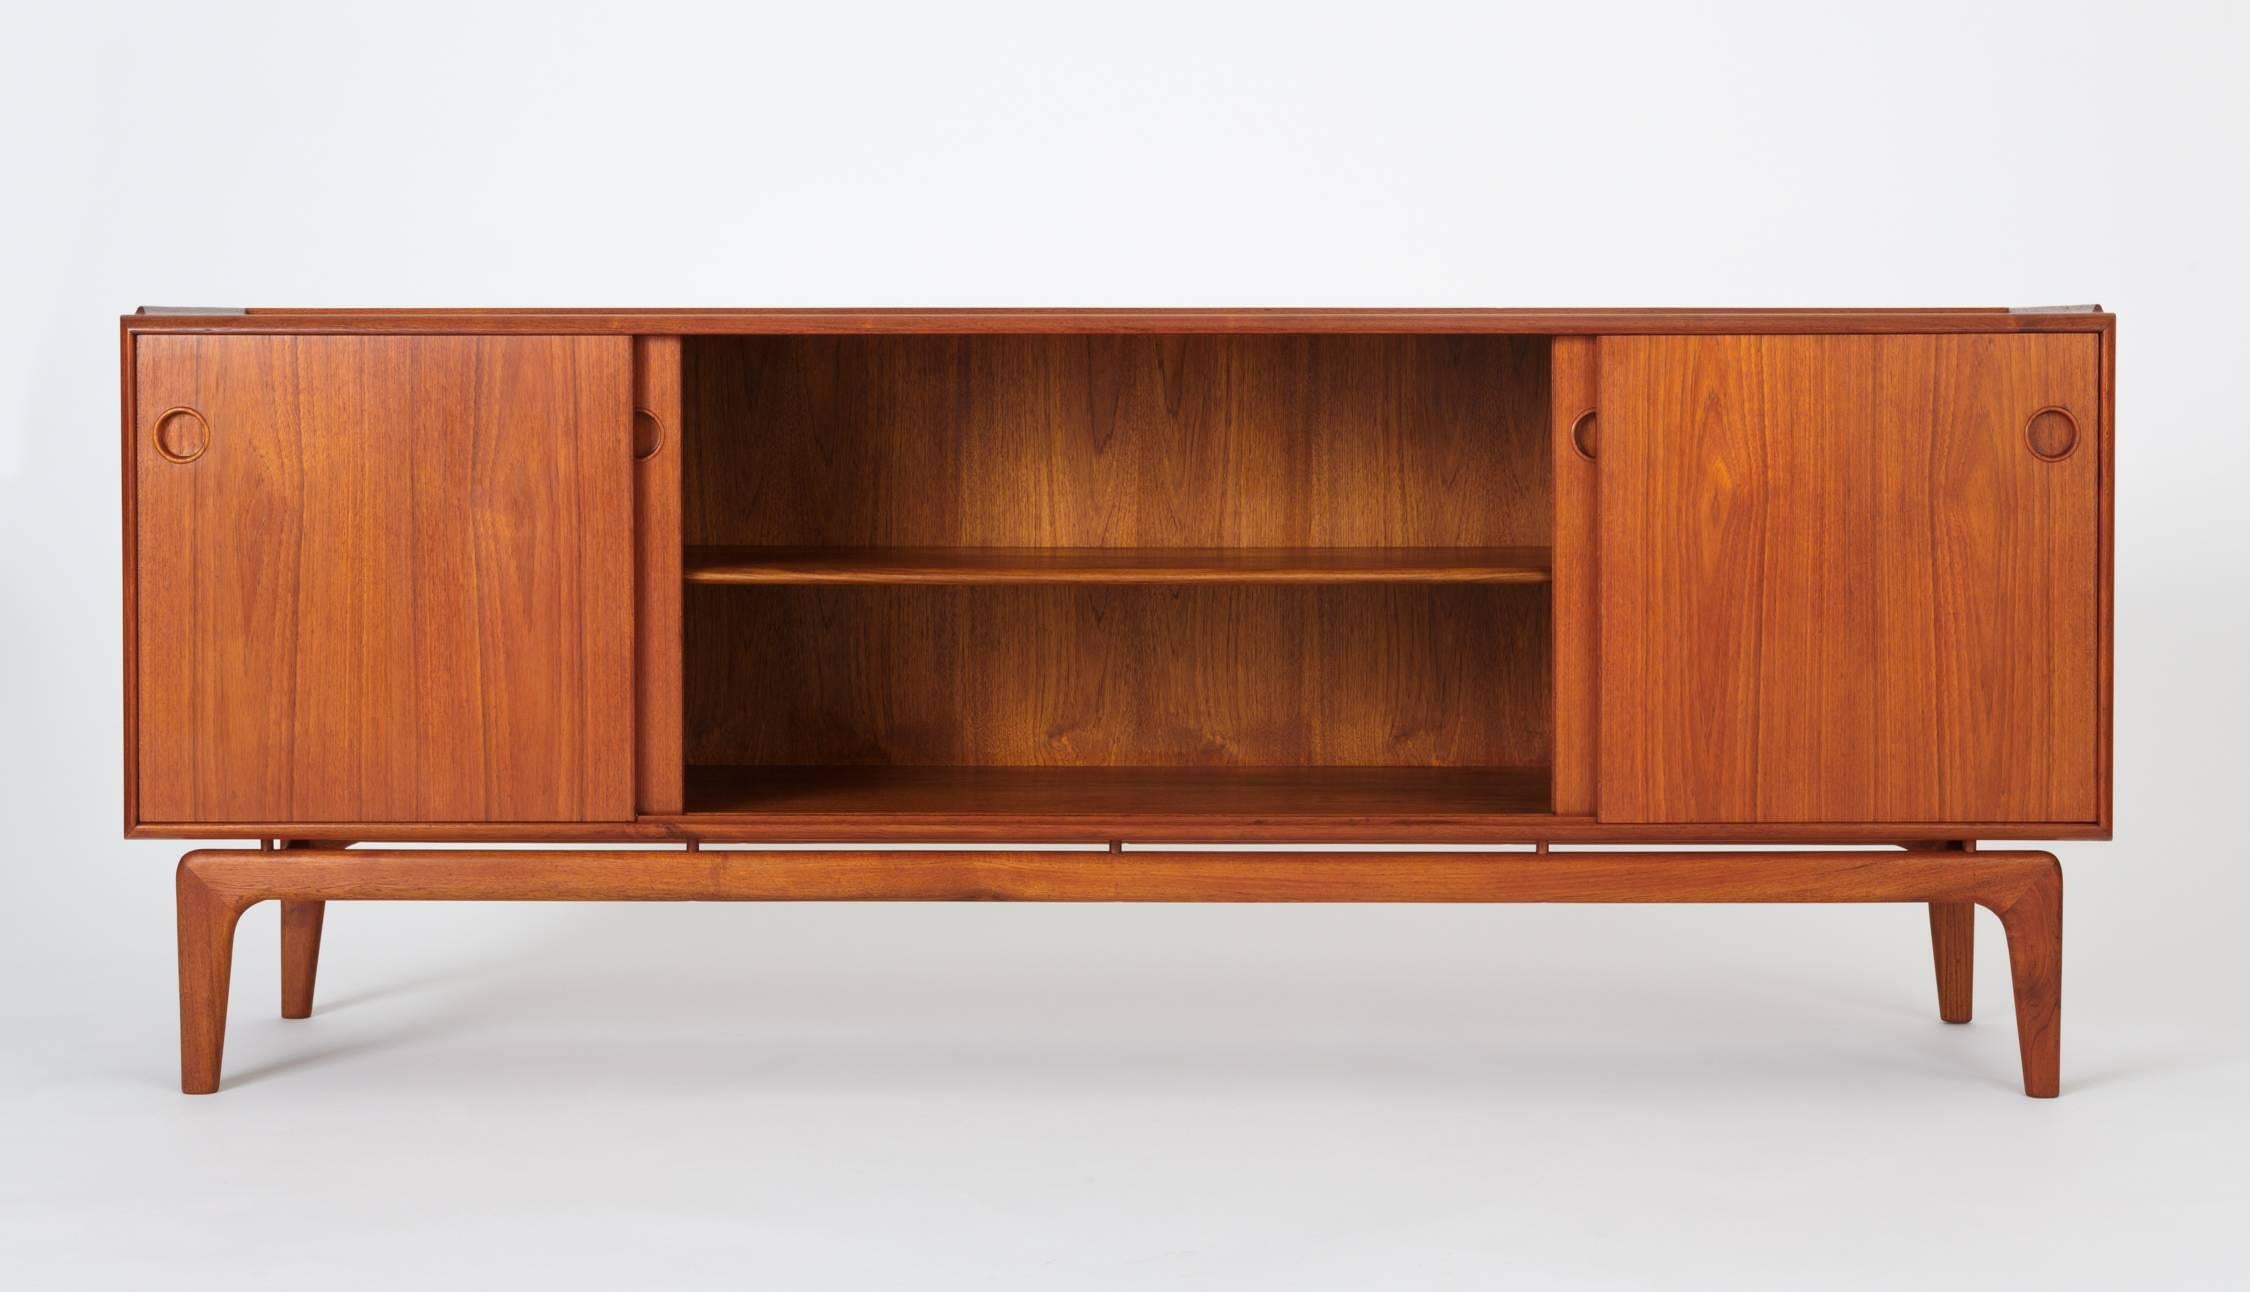 A Danish modern teak credenza or sideboard from Arne Hovmand Olsen for Mogens Kold Møbelfabrik. The piece has four sliding panel doors on two sets of runners, allowing flexibility of access or display. Each door opens at a recessed round pull. The